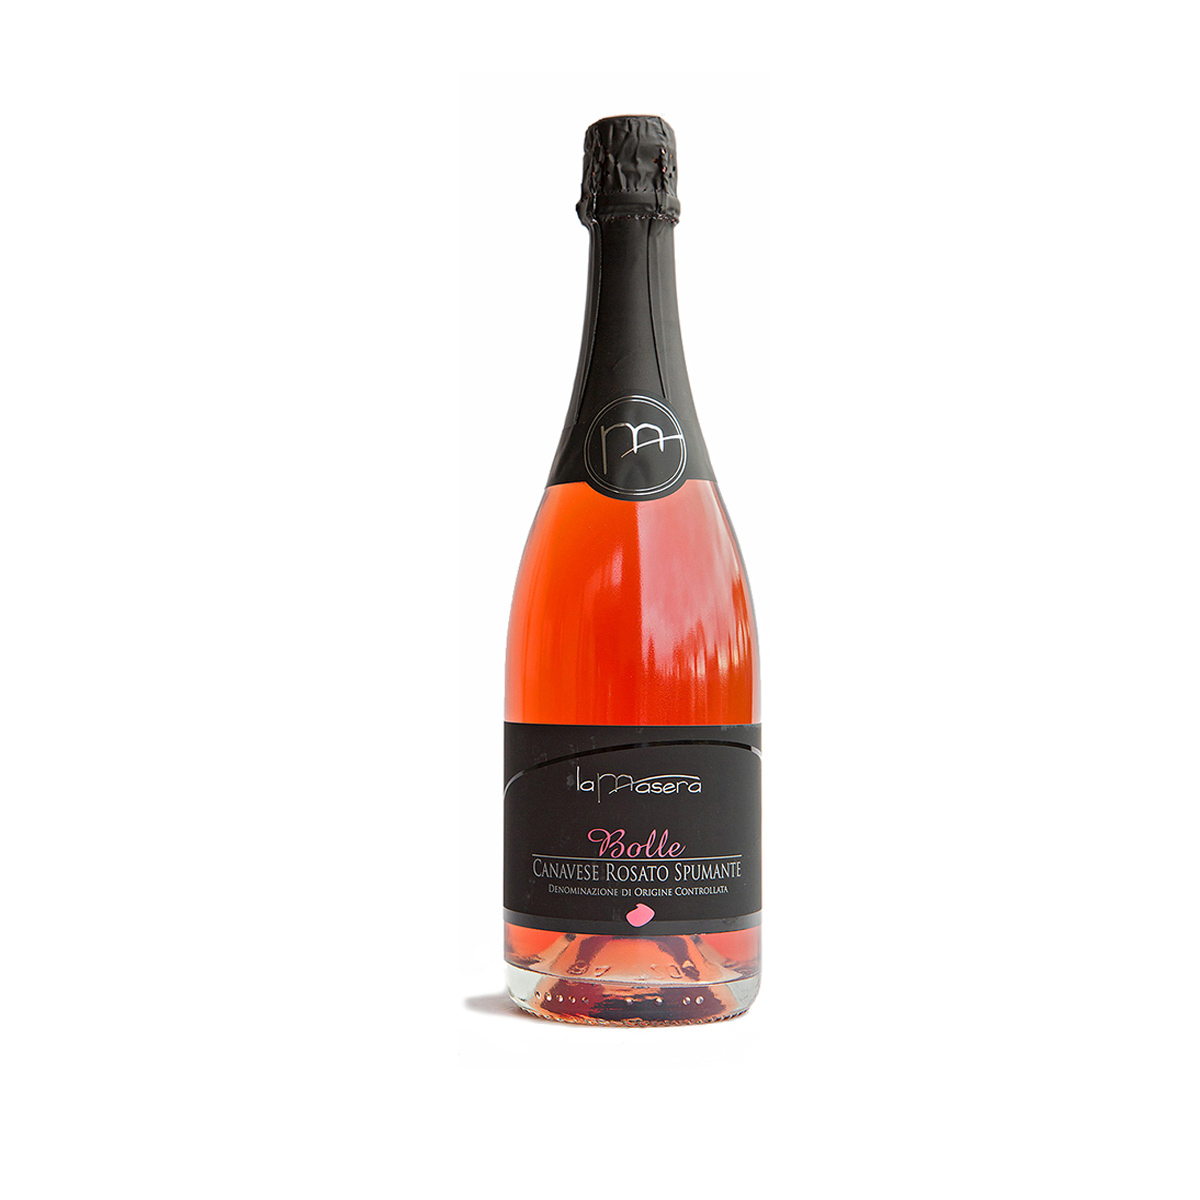 Canavese Rosato Spumante Bolle